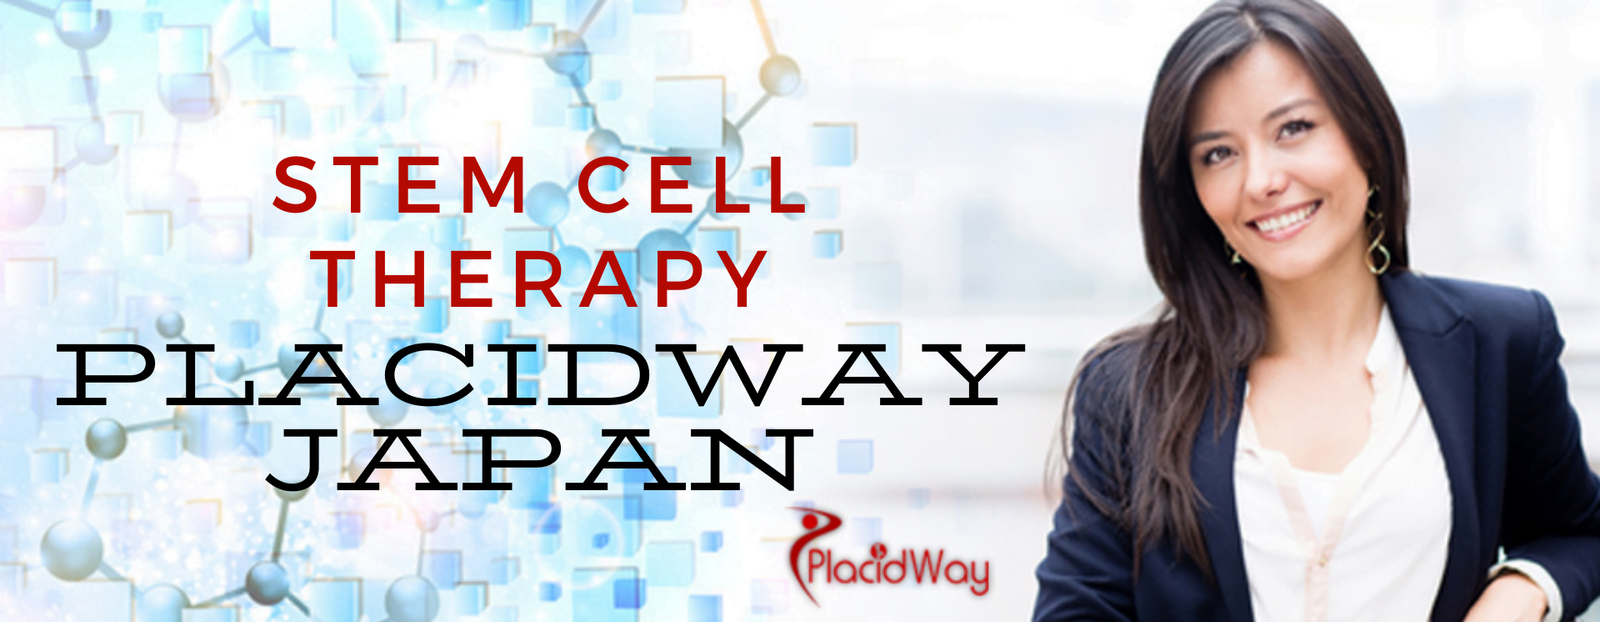 PlacidWay Japan-Stem Cell Therapy